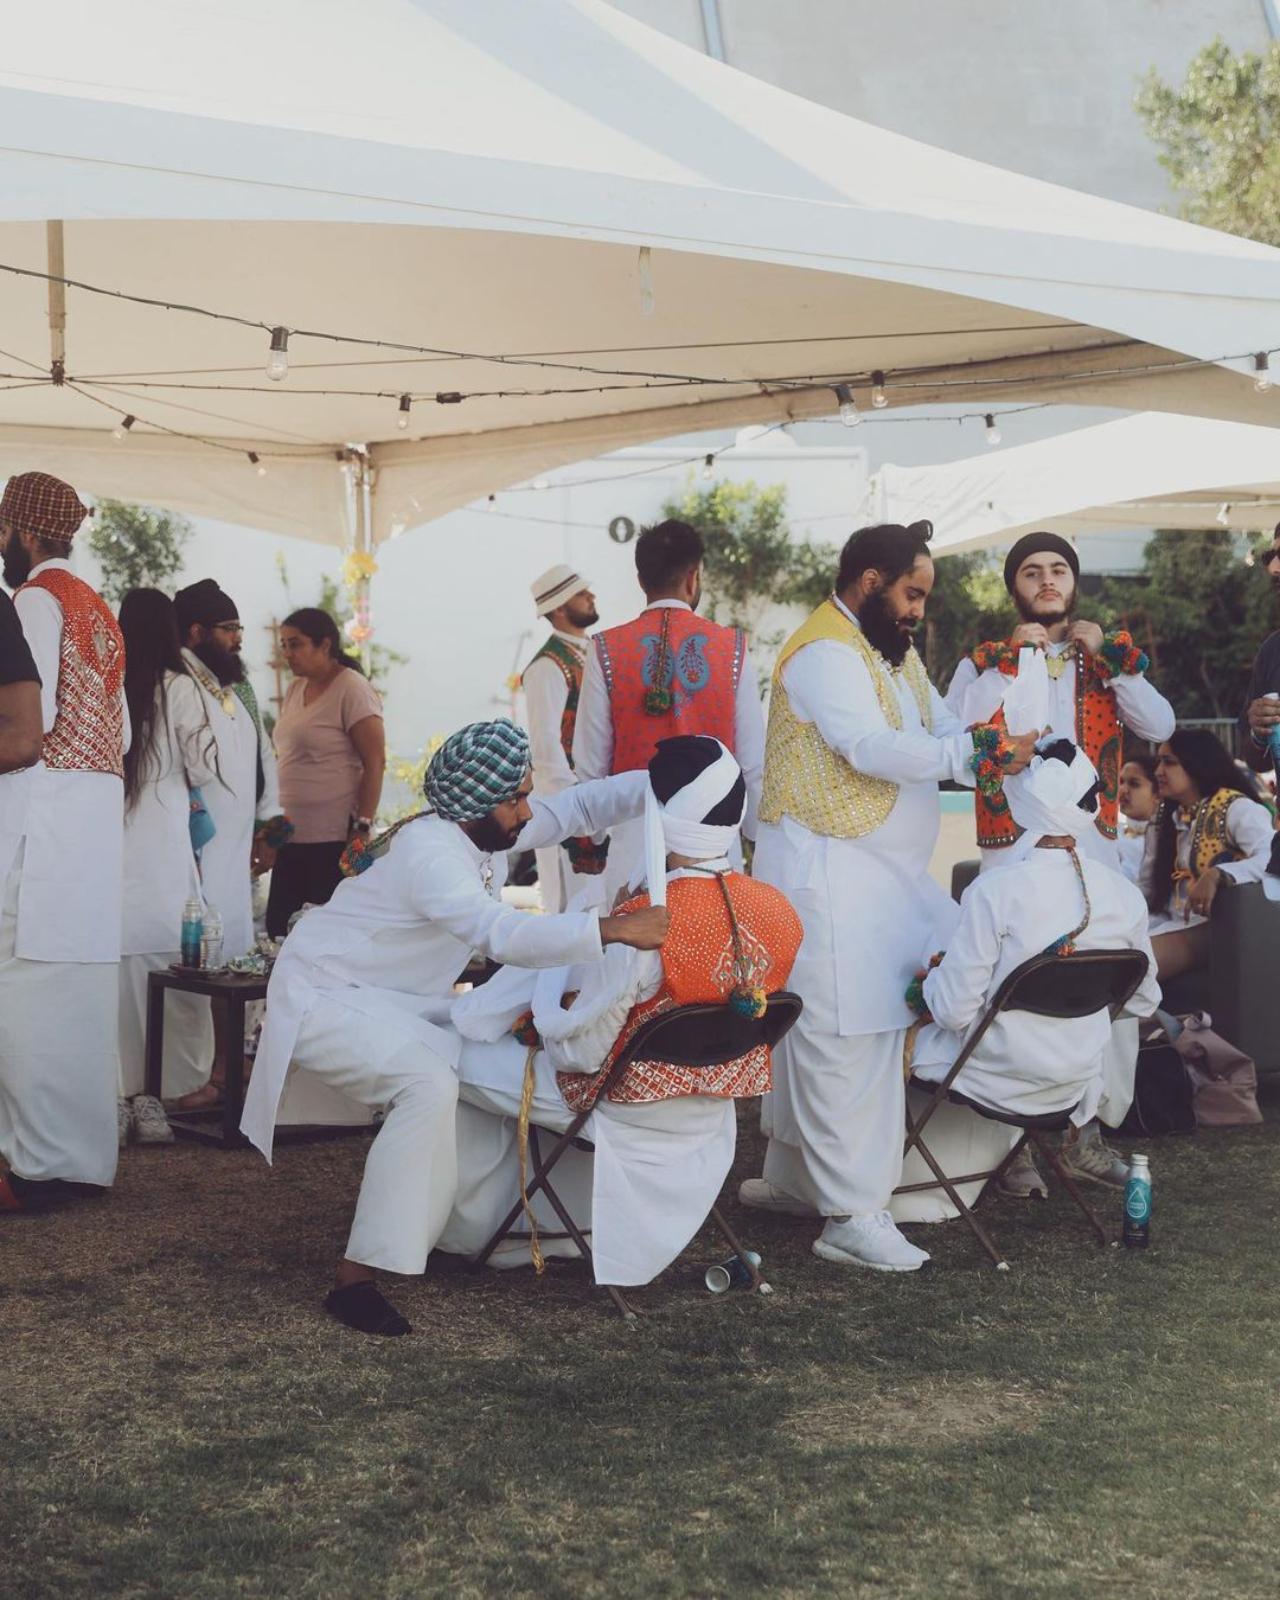 The Punjabi vibe clearly took over at Coachella